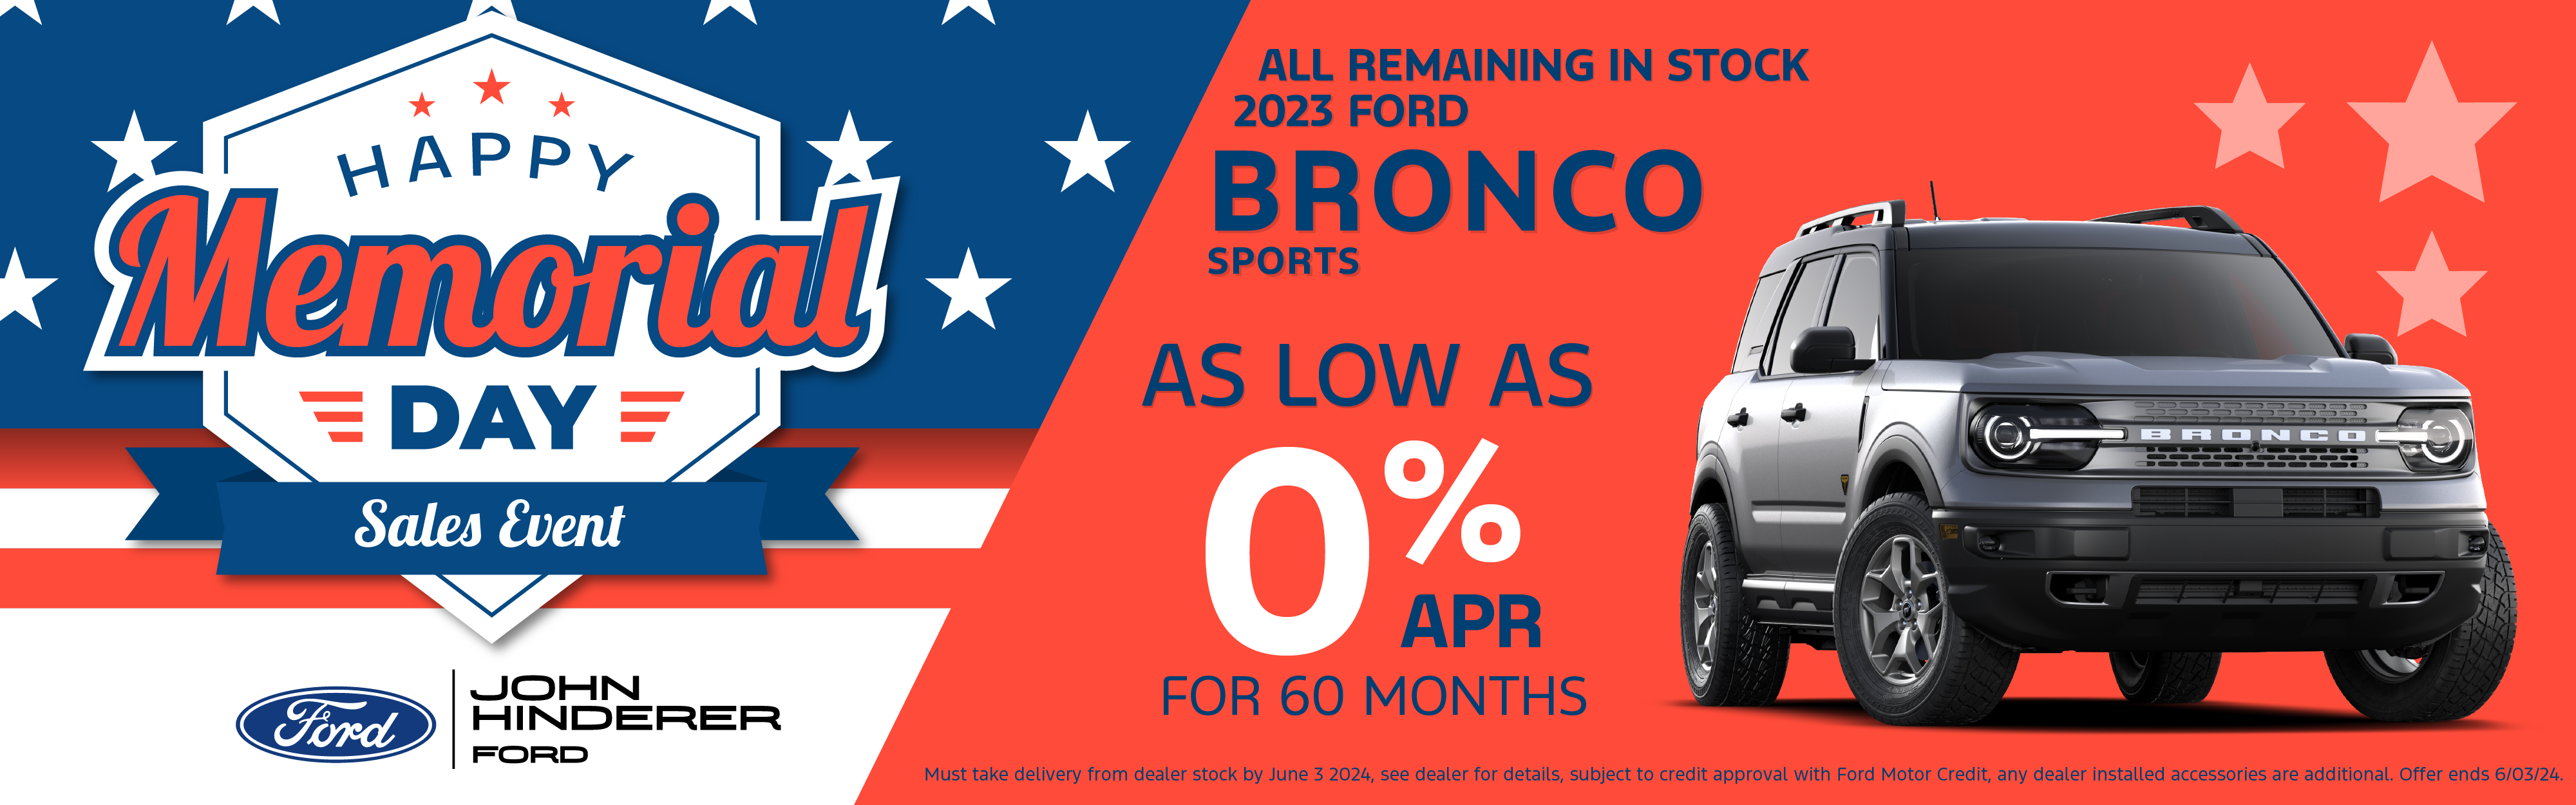 As low as 0% APR for 60 months on 2023 Bronco Sports